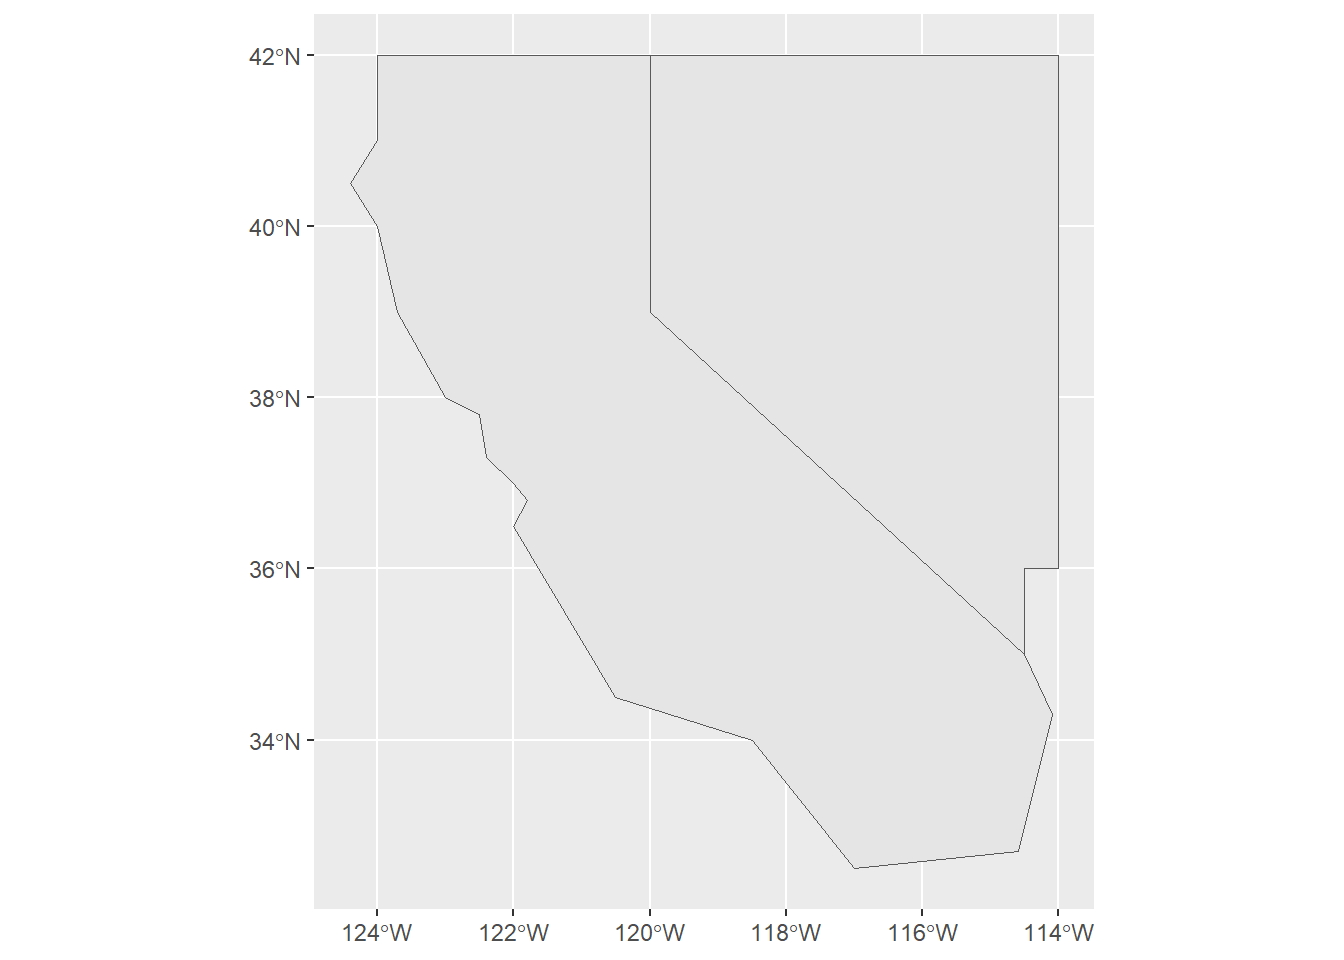 A simple ggplot2 map built from scratch with hard-coded data as simple feature columns